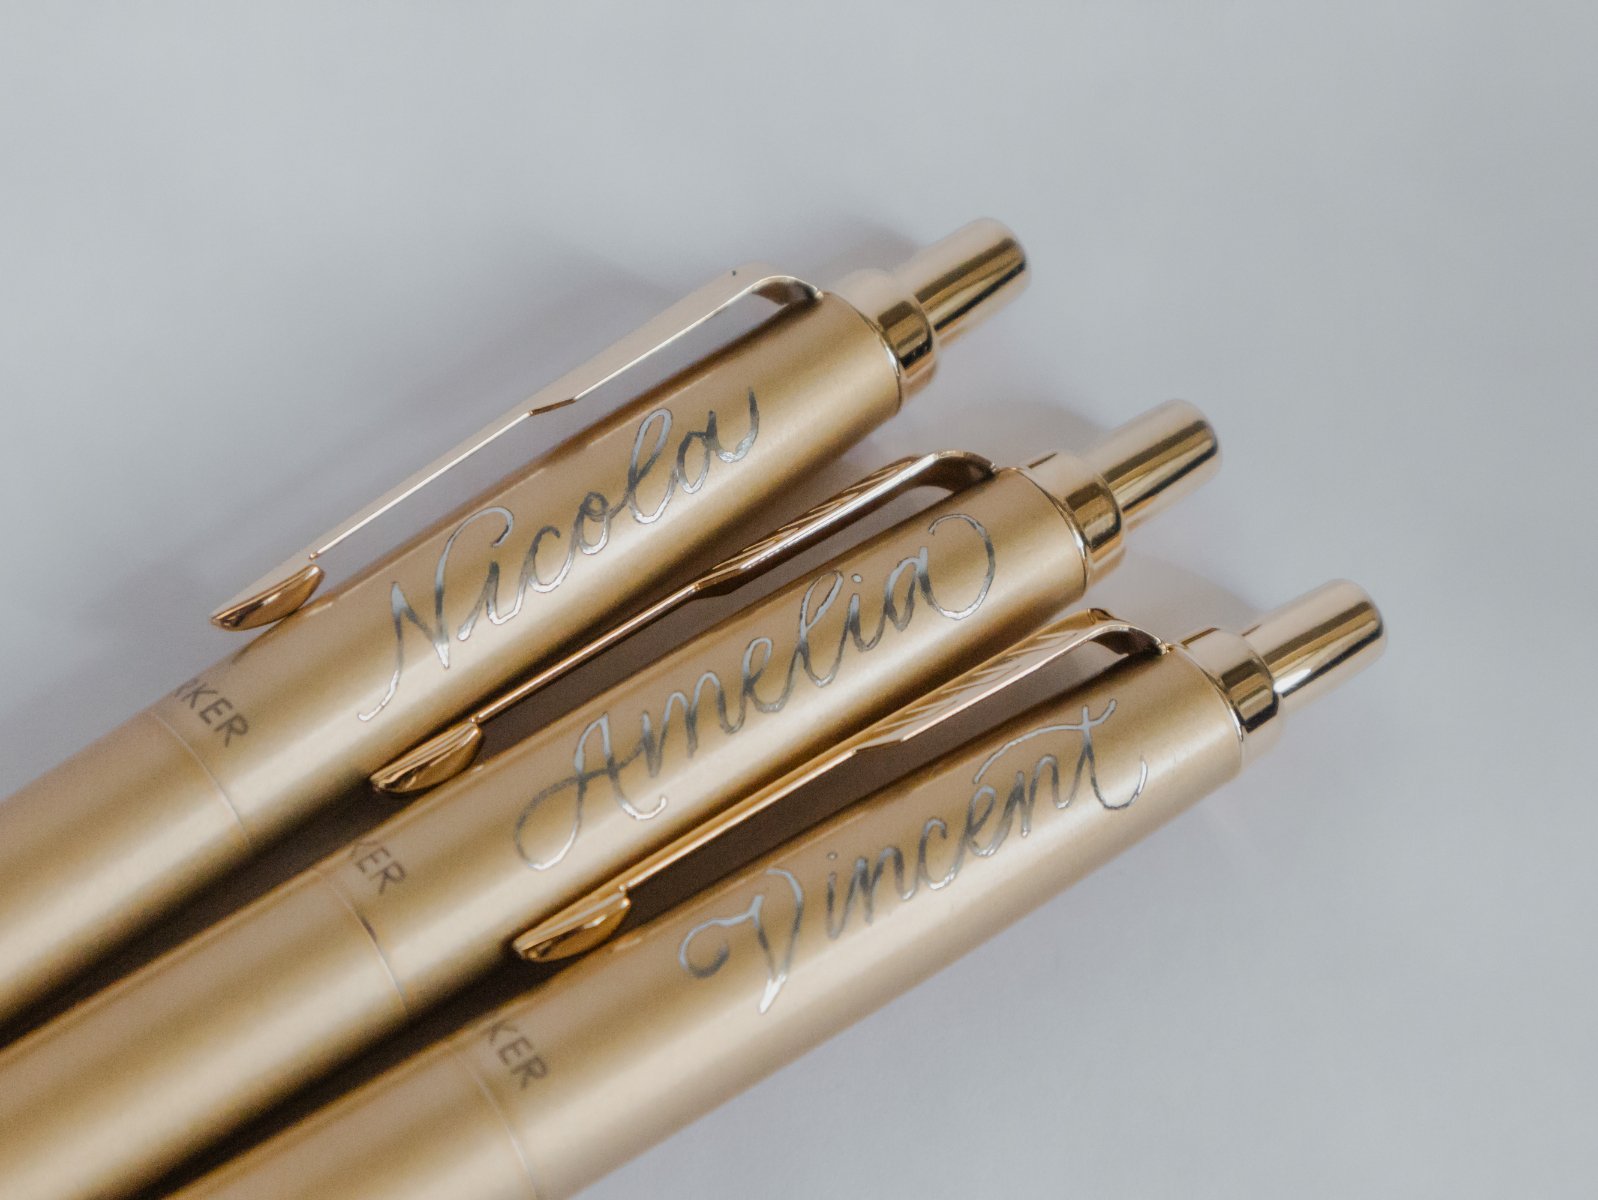 First Name Calligraphy Engraving on Parker Pens for Bloomberg 6.jpg